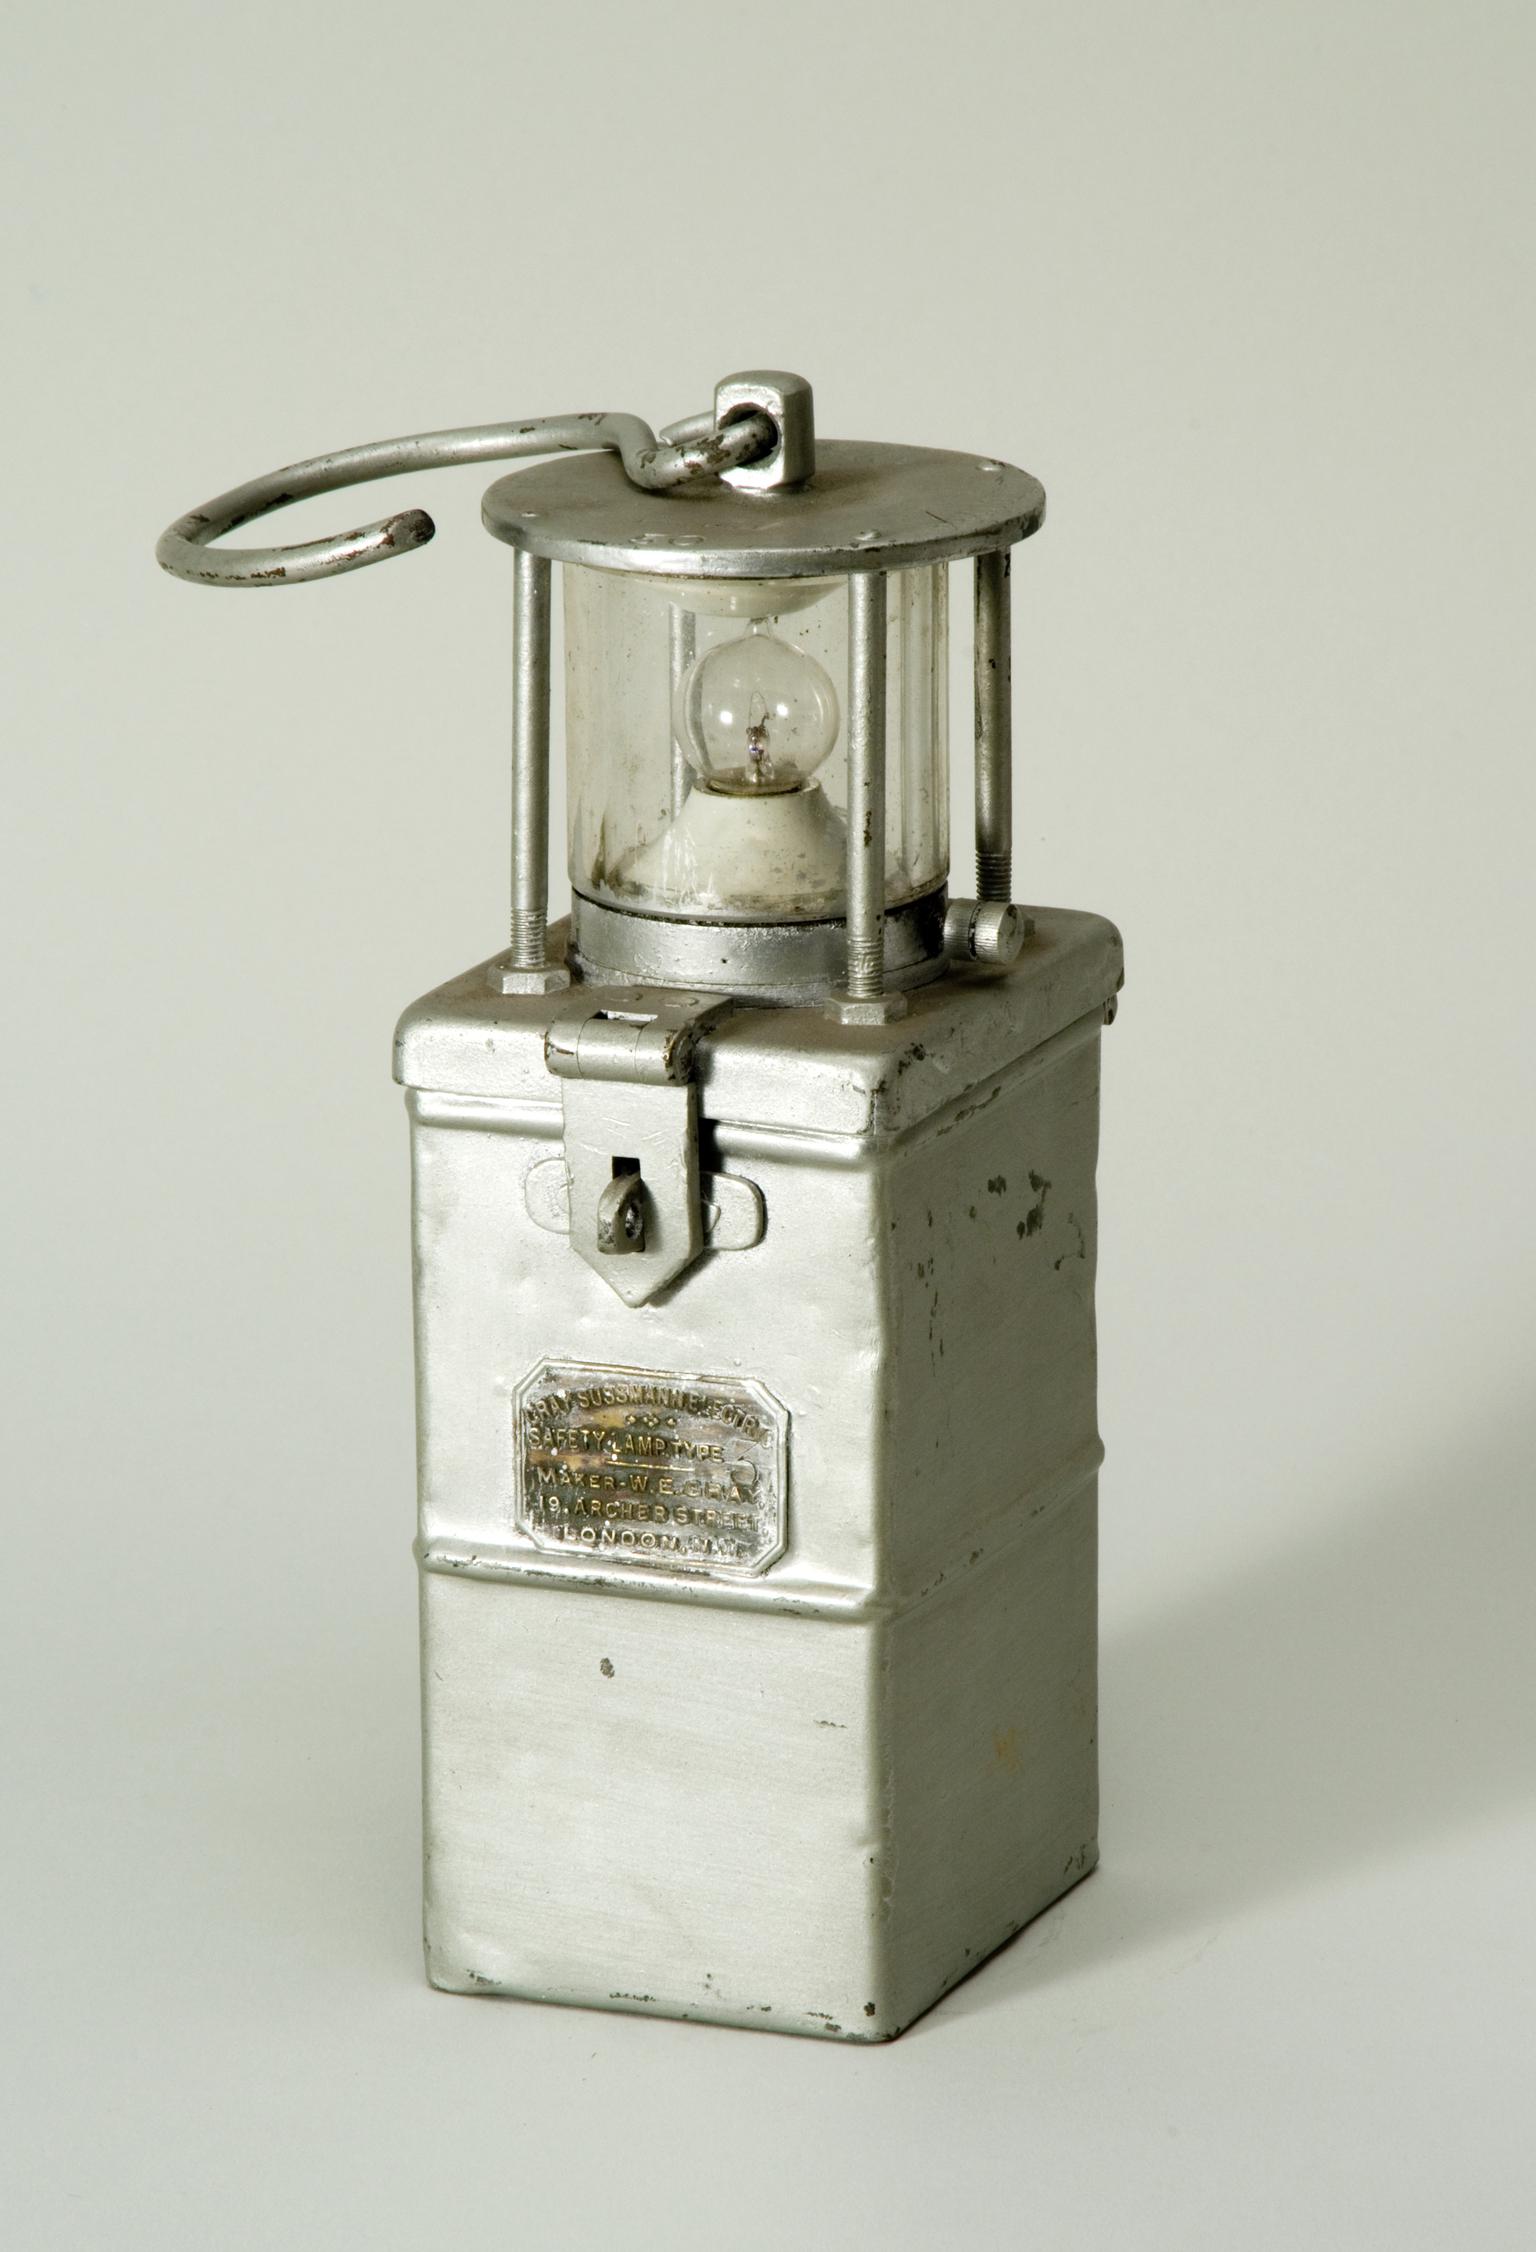 Gray's patent electric hand lamp